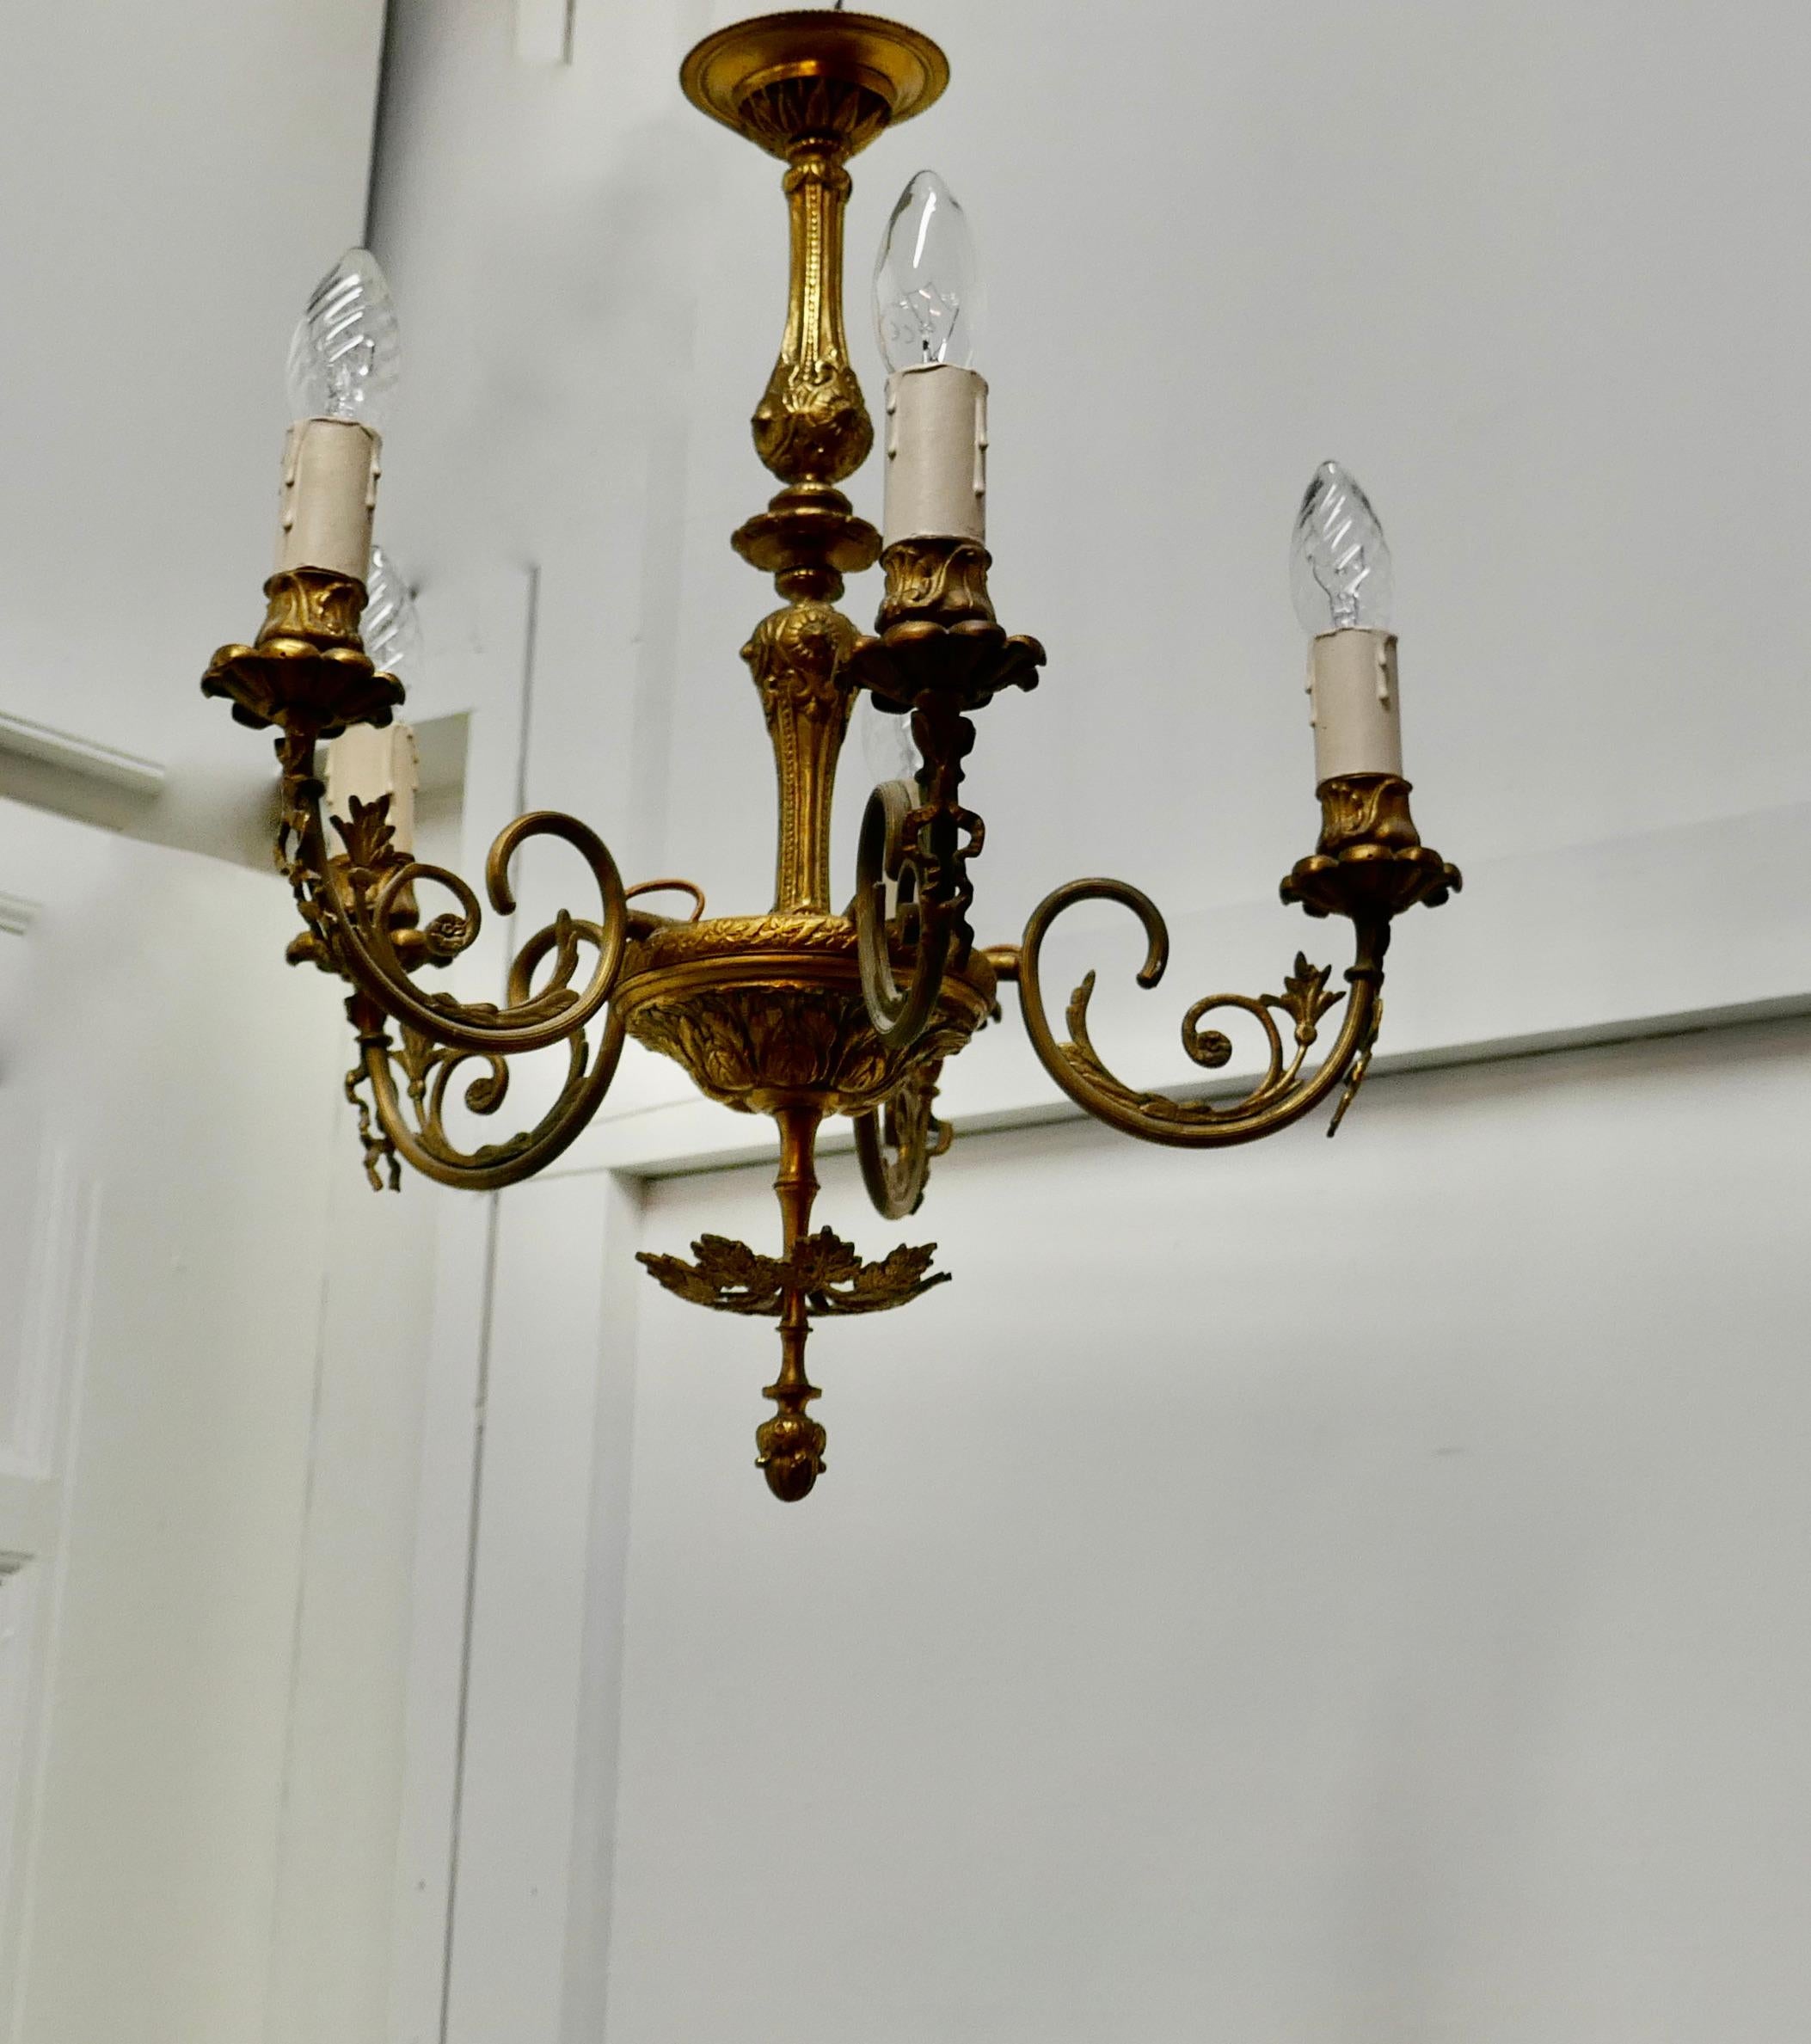 Gilded Brass 5 Branch Rococo Style Chandelier 

The chandelier has 5 branches, and is decorated in the Rocco fashion, very decorative brass work with acanthus leaves and curls
The chandelier is in working, and will need to be installed by an